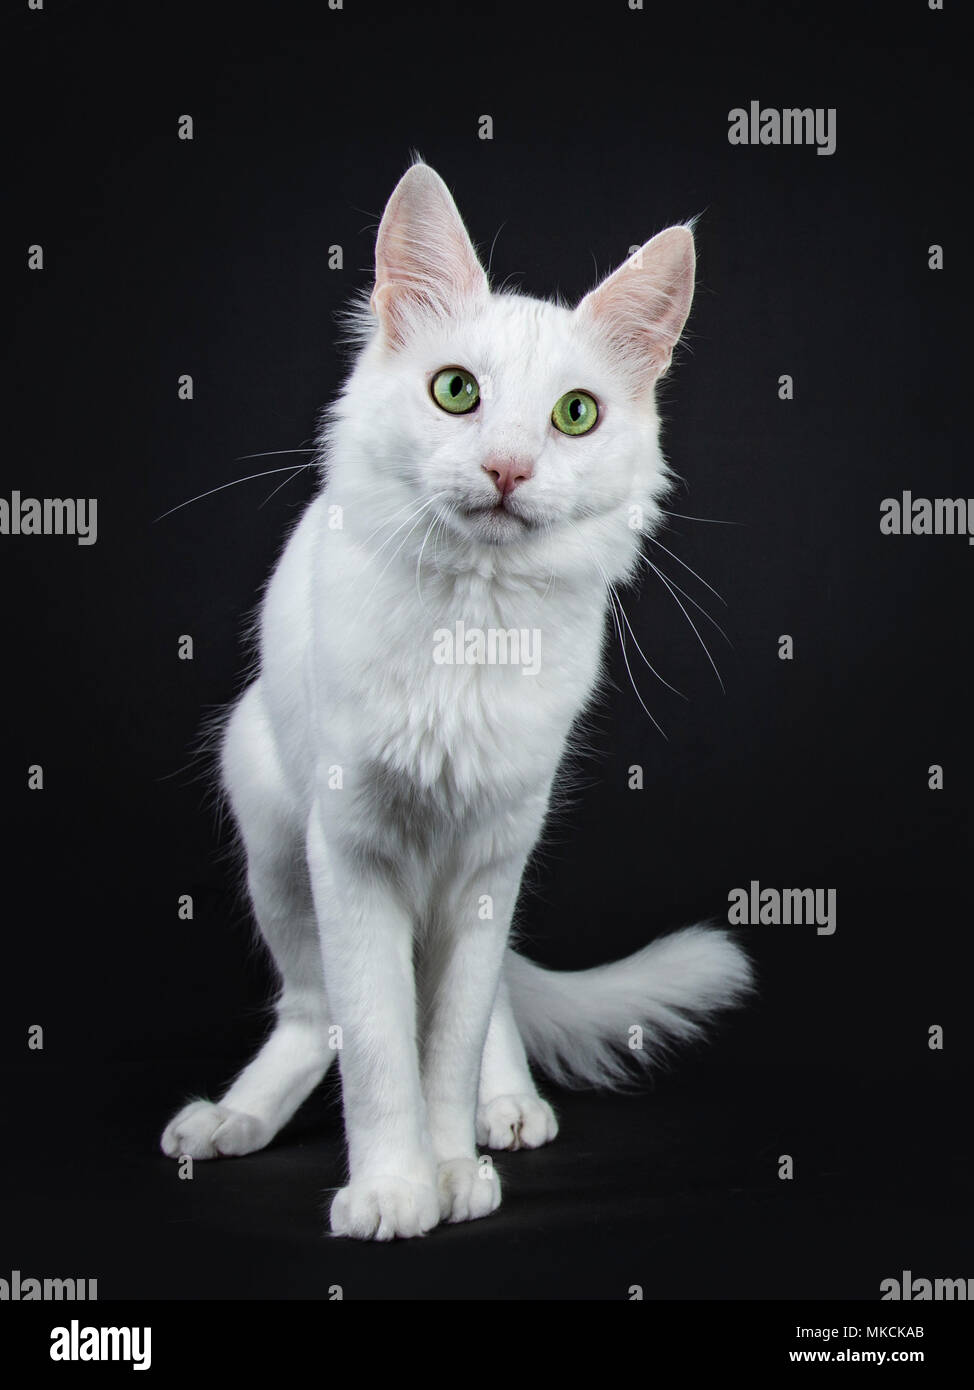 specify Countryside Magistrate Solid white Turkish Angora cat with green eyes standing isolated on black  background looking curiously at camera Stock Photo - Alamy